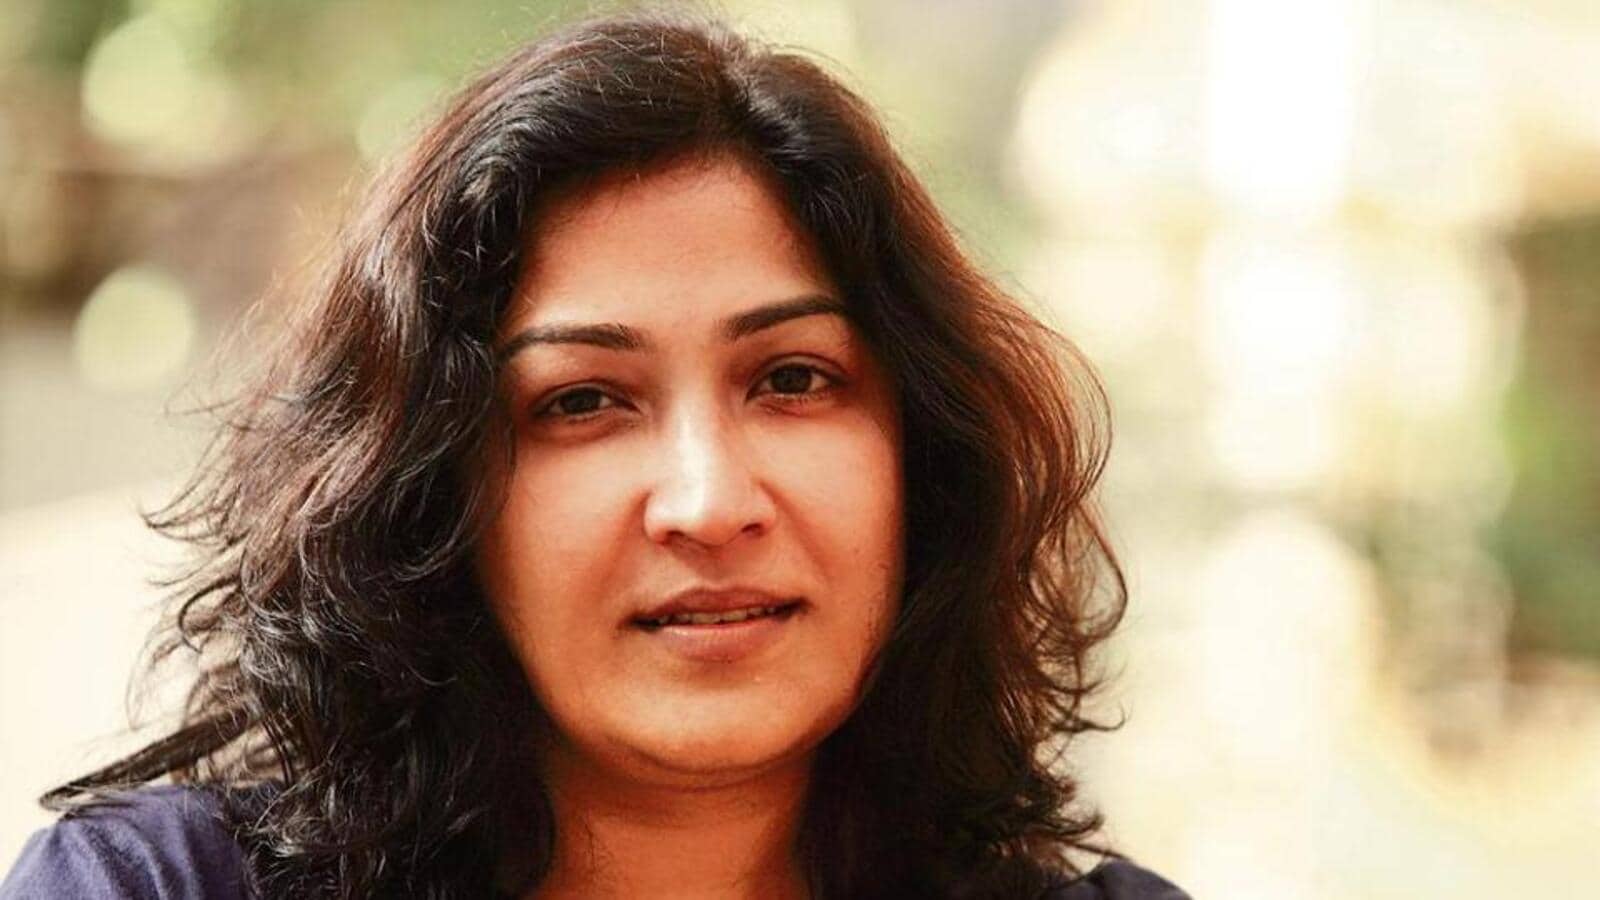 Deepa Bhatia: When I started film editing, people would say ‘you must be the assistant’